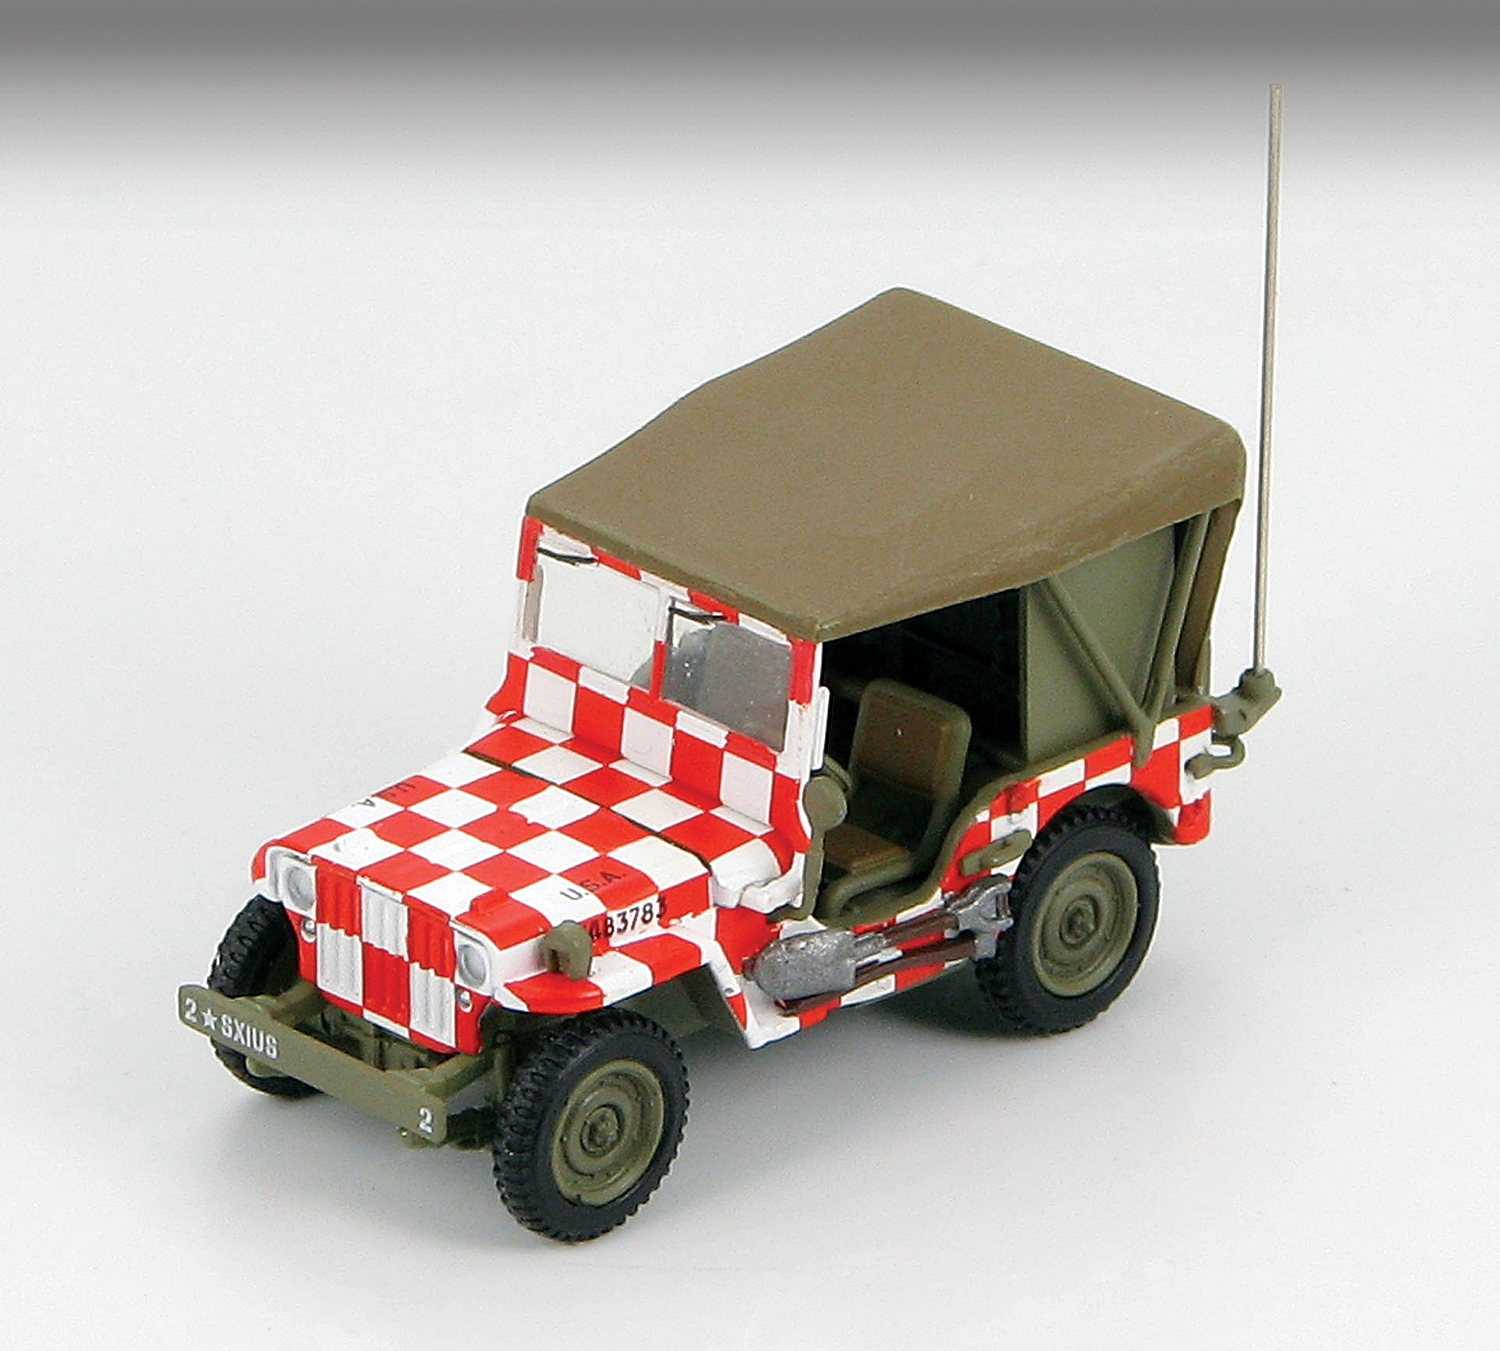 HG4209 Willys MB Jeep Airfield Jeep 172 Scale